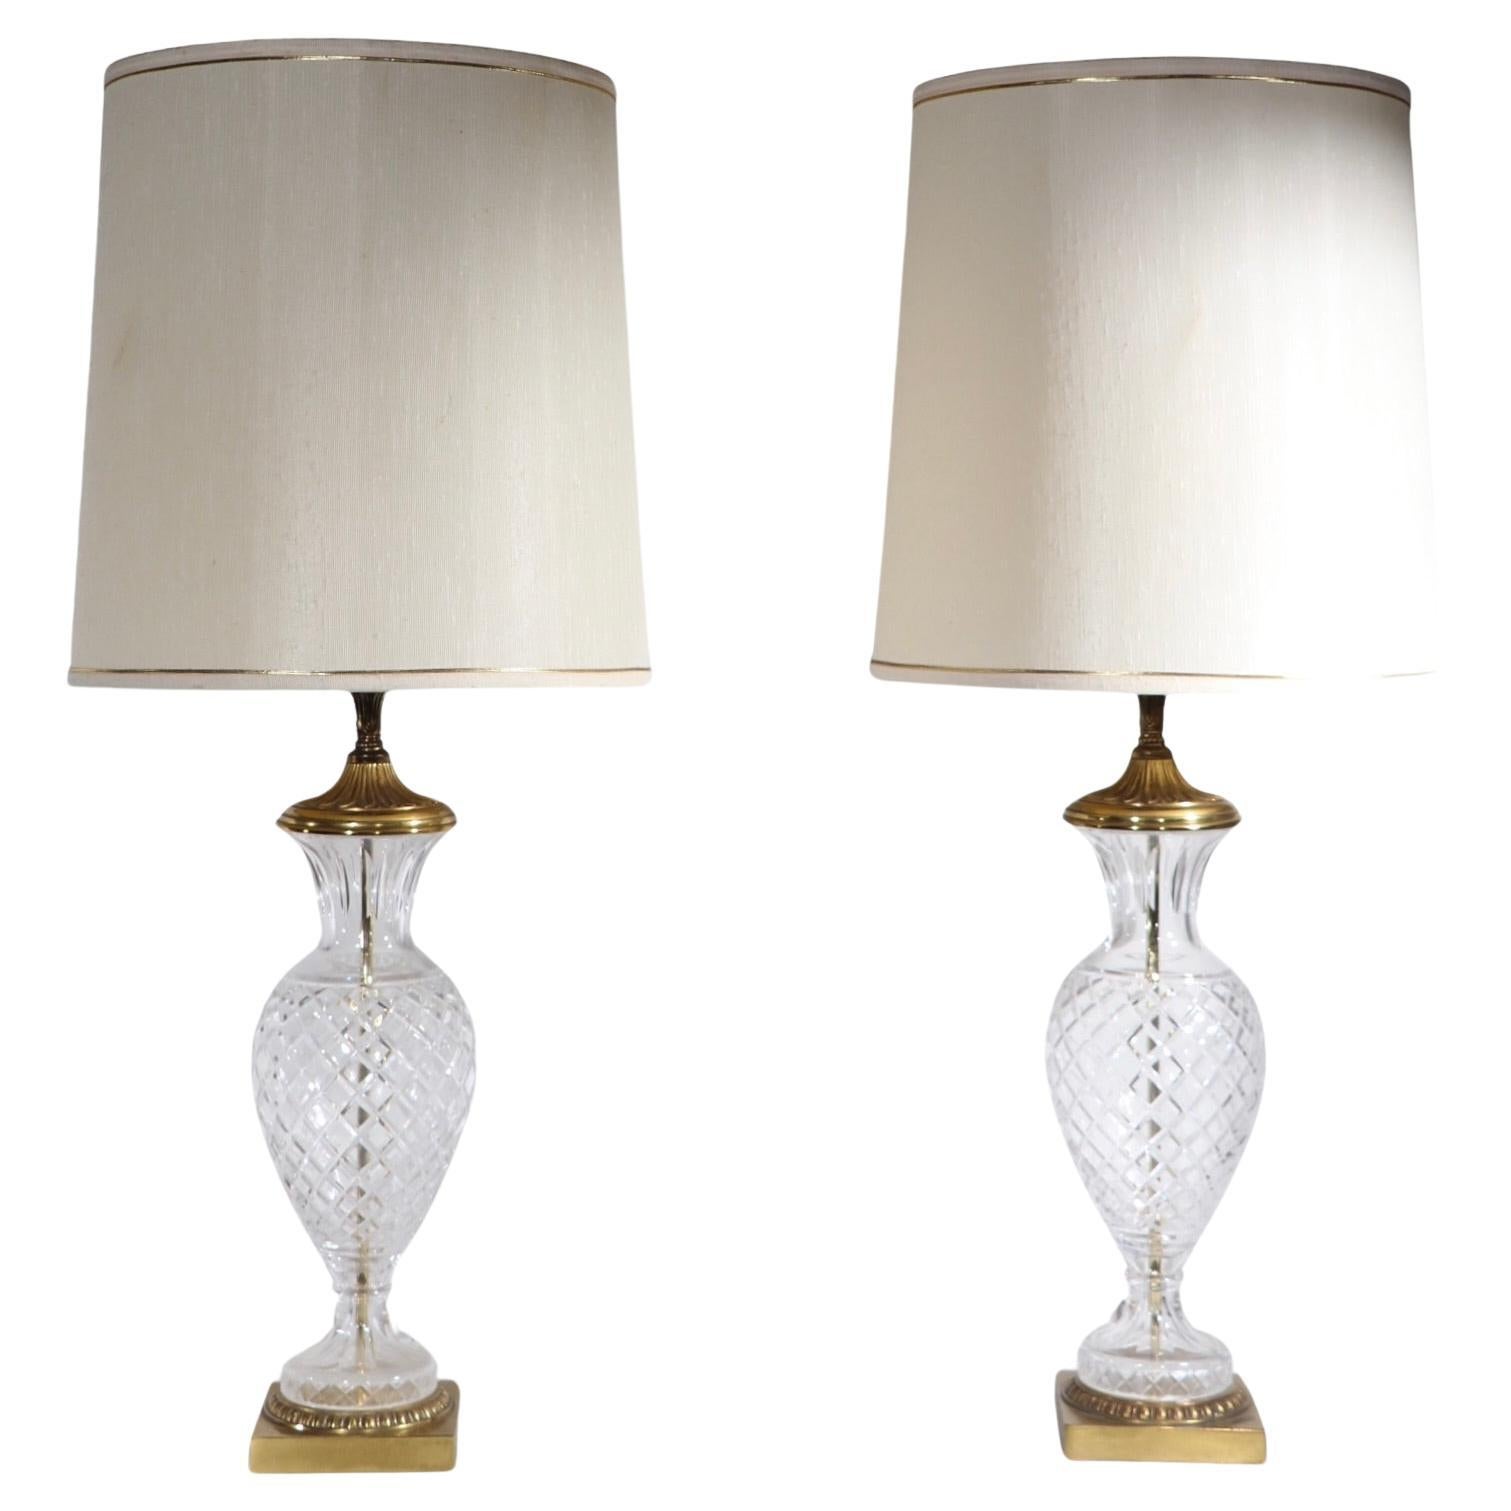 Pair of   Formal Classical Revival Style Glass and Brass  Lamps c 1940/1960's For Sale